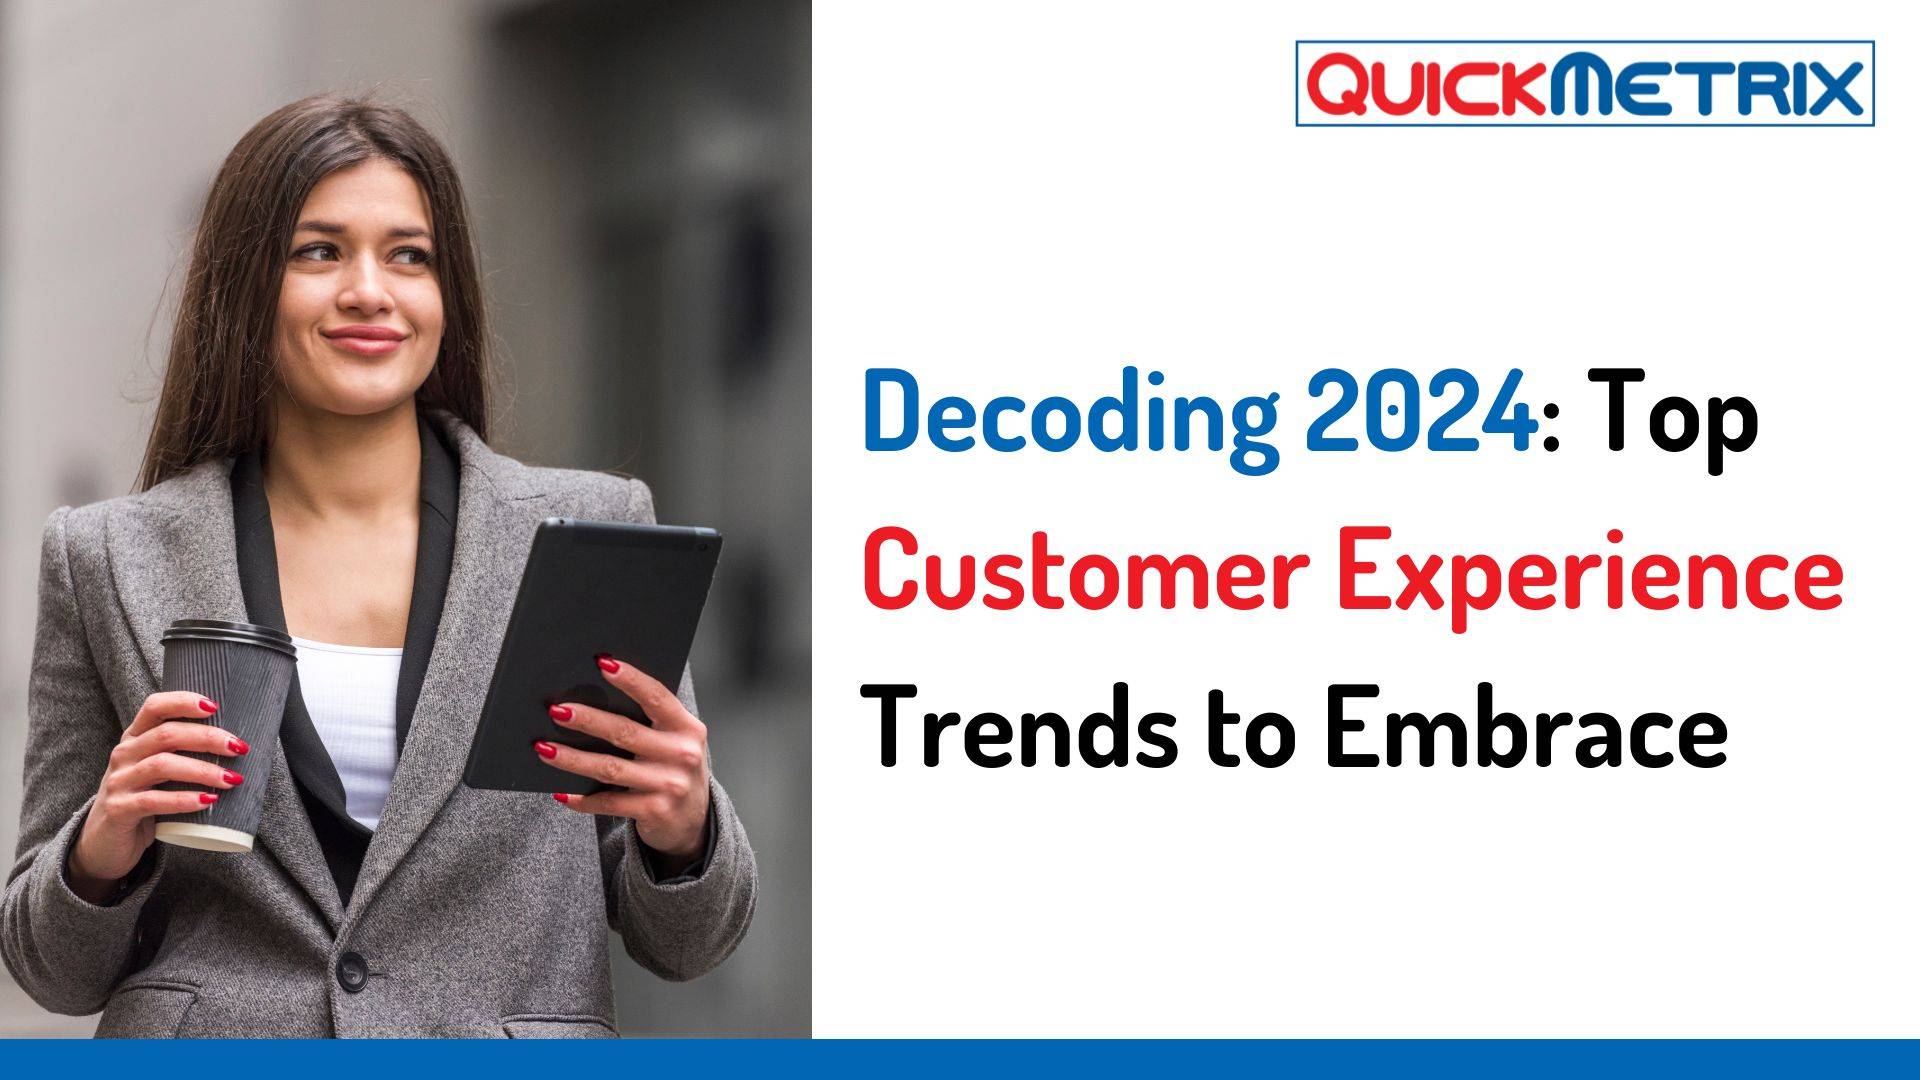 Decoding 2024: Top Customer Experience Trends to Embrace